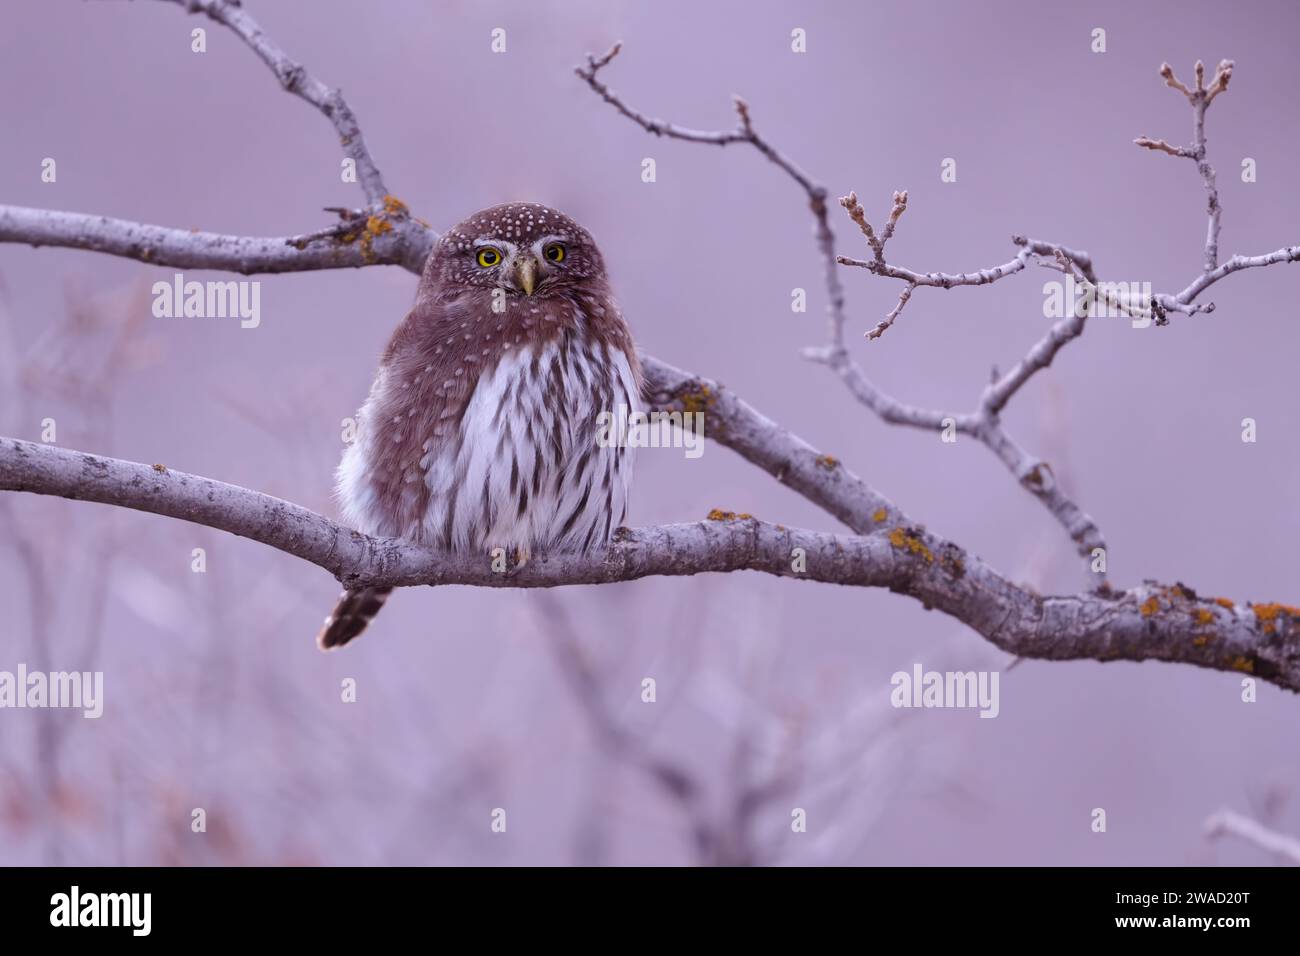 Northern pygmy owl perched on a branch Stock Photo